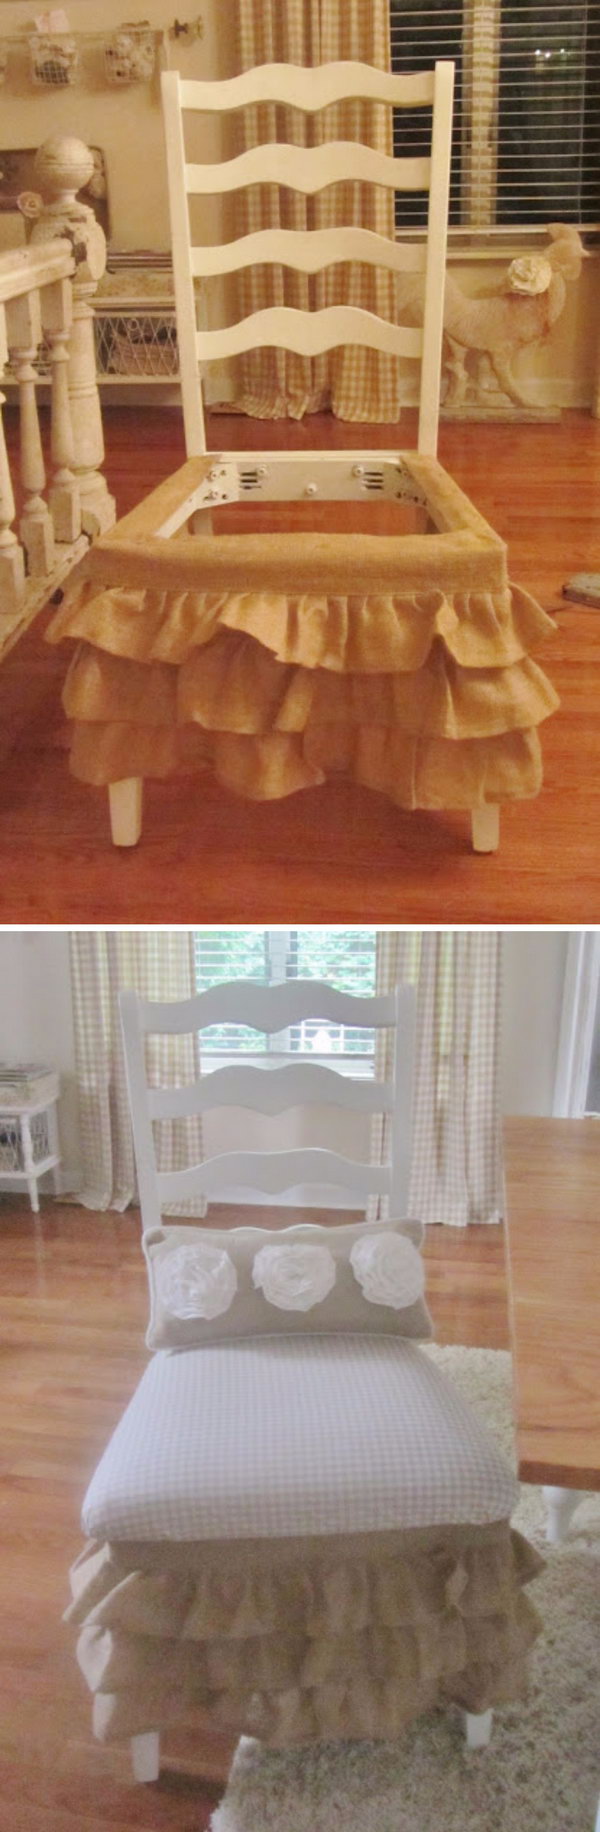 Ruffled Burlap Chair Skirt Made Out Of Valances. 